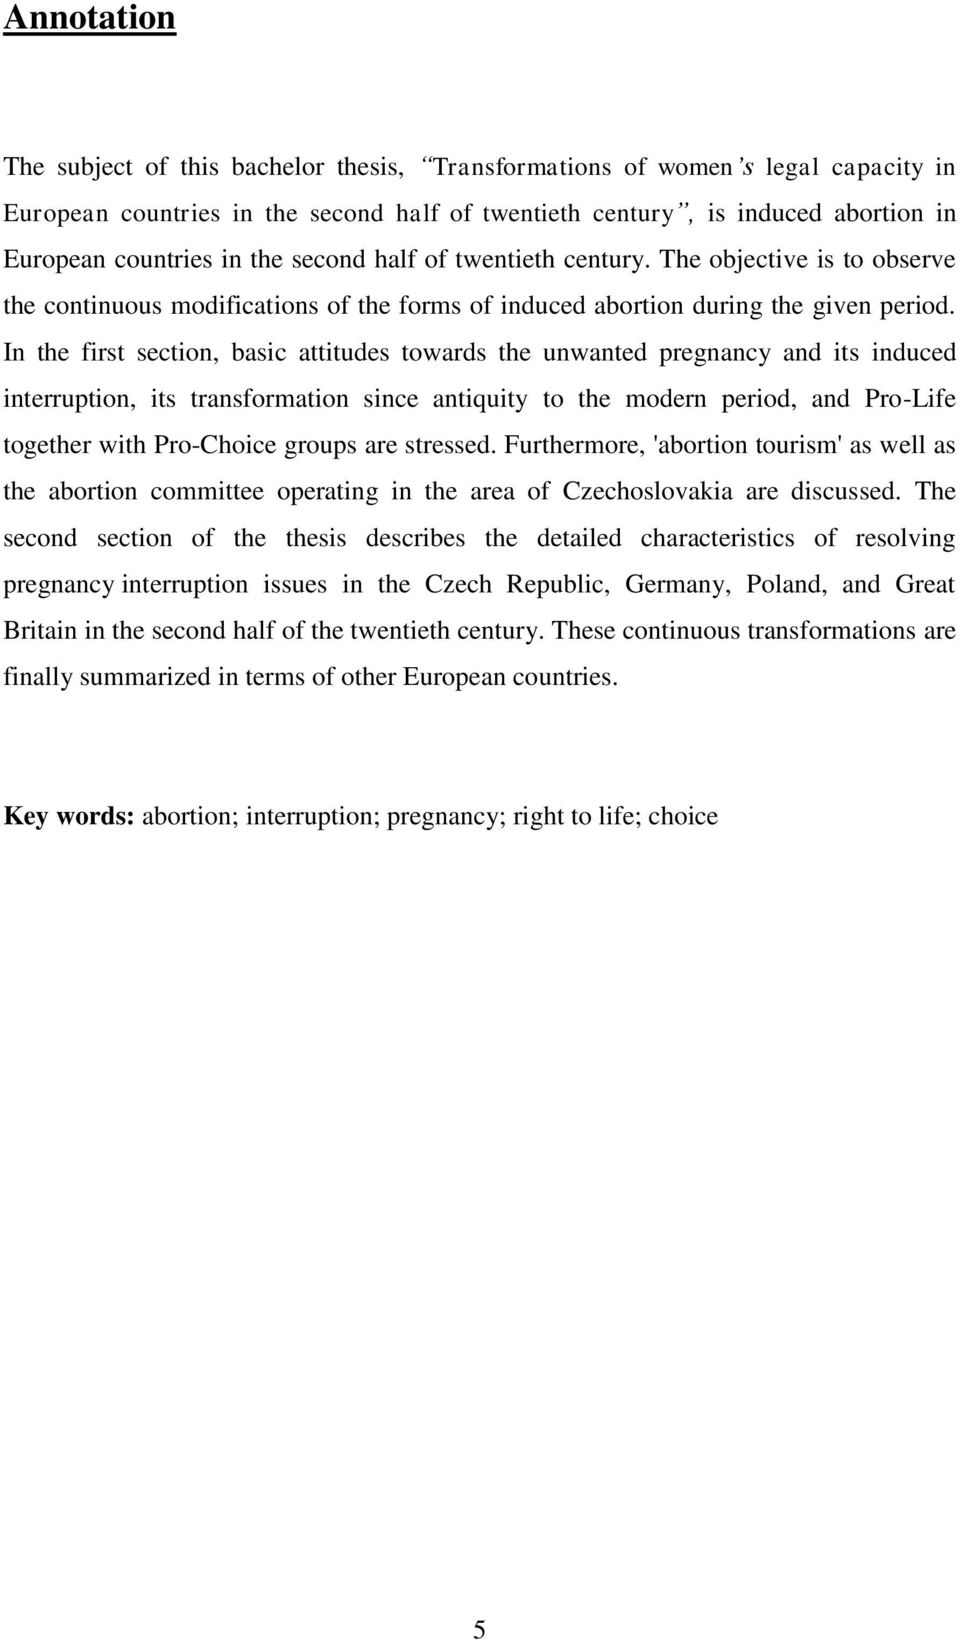 In the first section, basic attitudes towards the unwanted pregnancy and its induced interruption, its transformation since antiquity to the modern period, and Pro-Life together with Pro-Choice